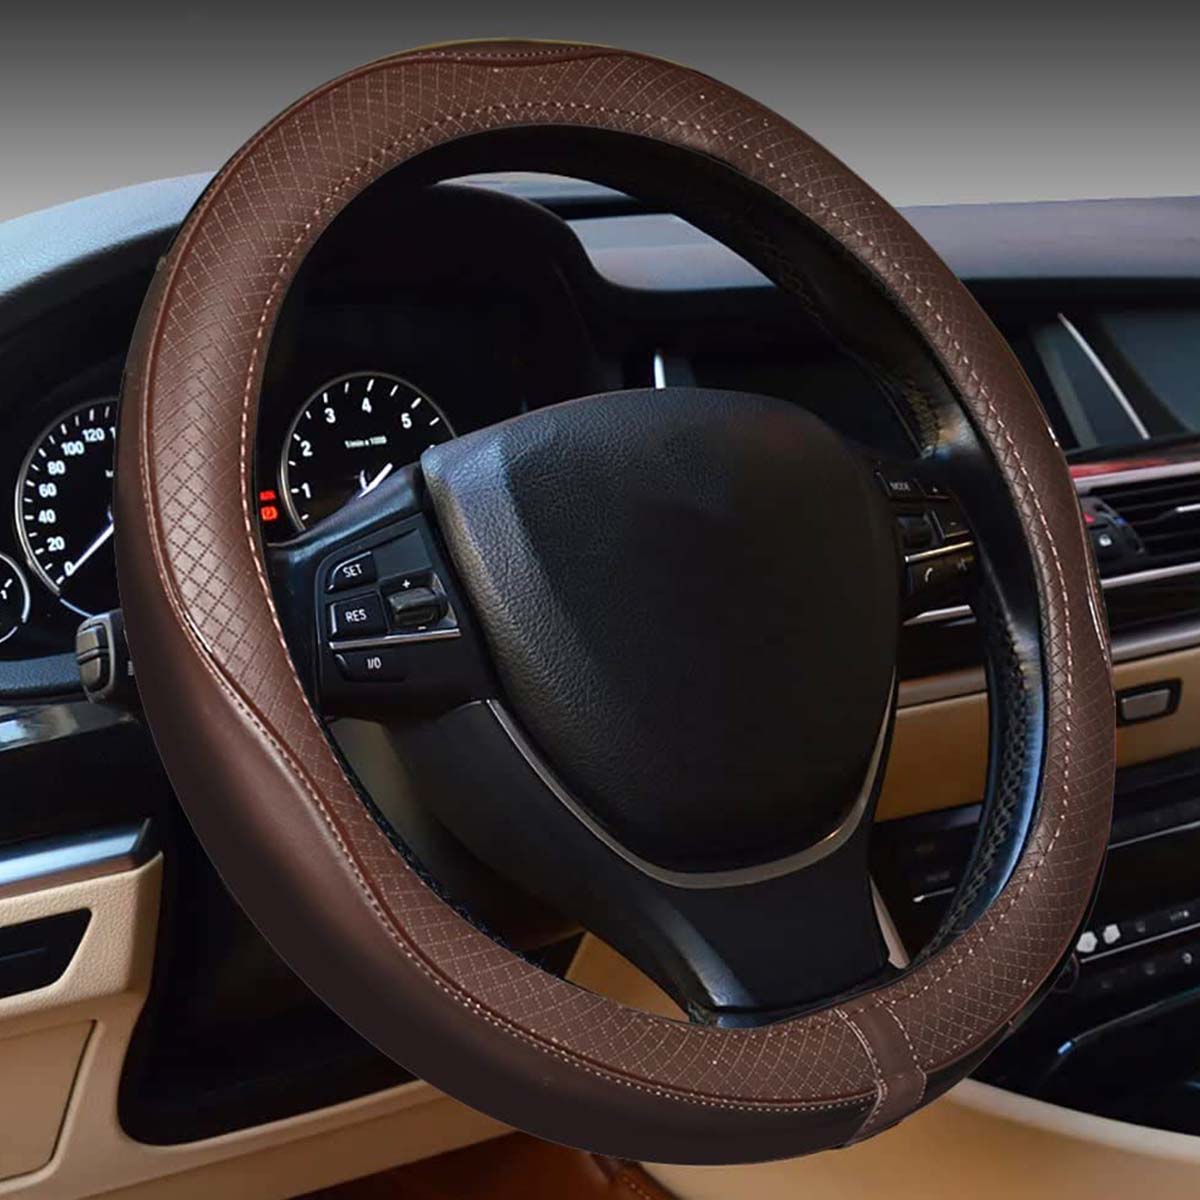 Enhance Your Ride with a Stylish Cadillac Steering Wheel Cover